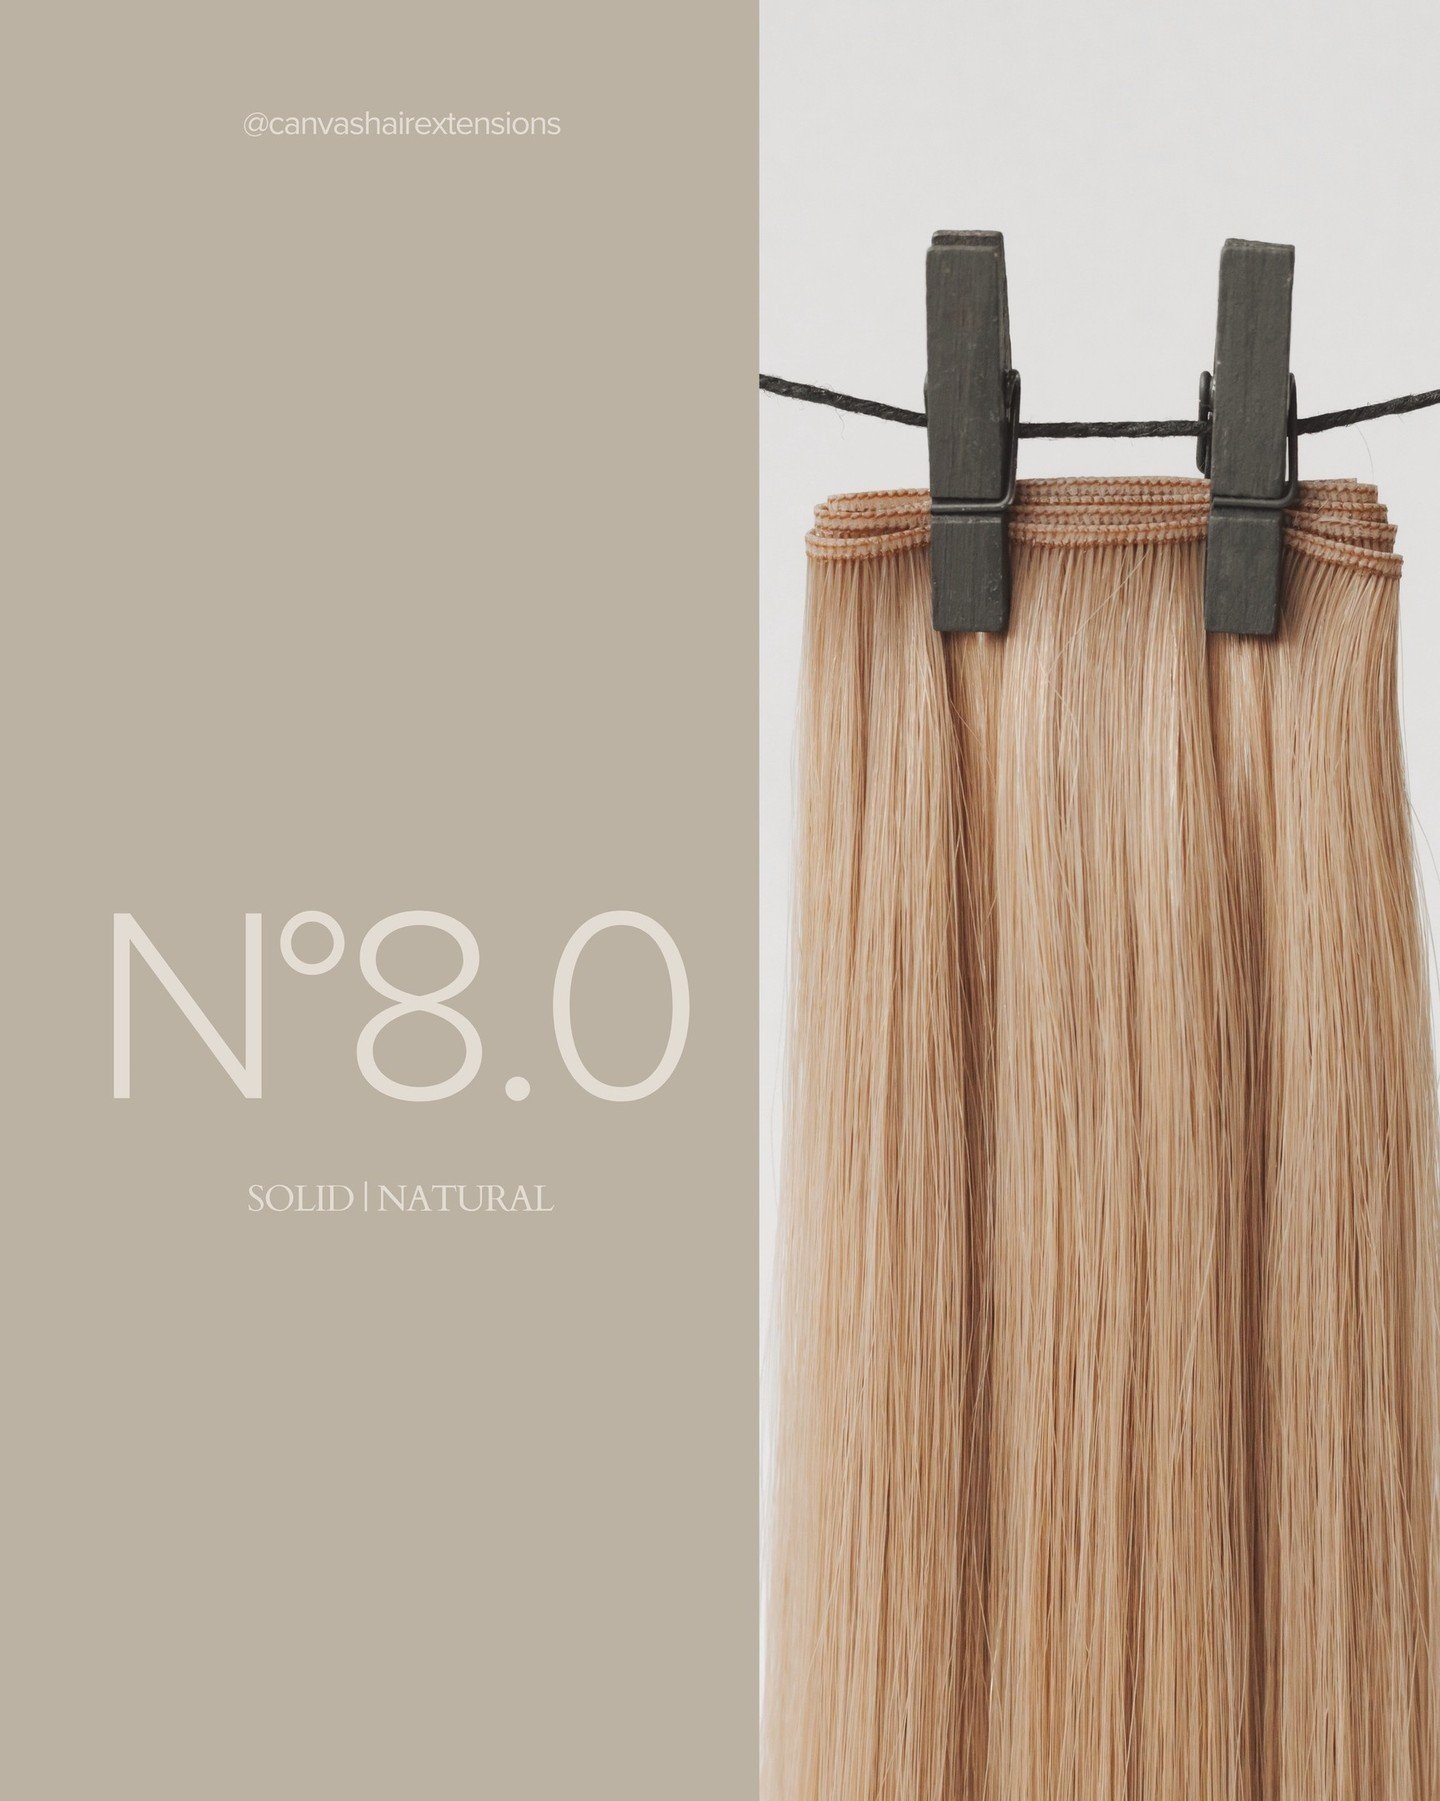 Spotlight on N&deg; 8.0.⁠
⁠
This is a perfect neutral shade that can be easily paired with a variety of colors. Canvas is easy to color and tone to reach your clients desired look. ⁠